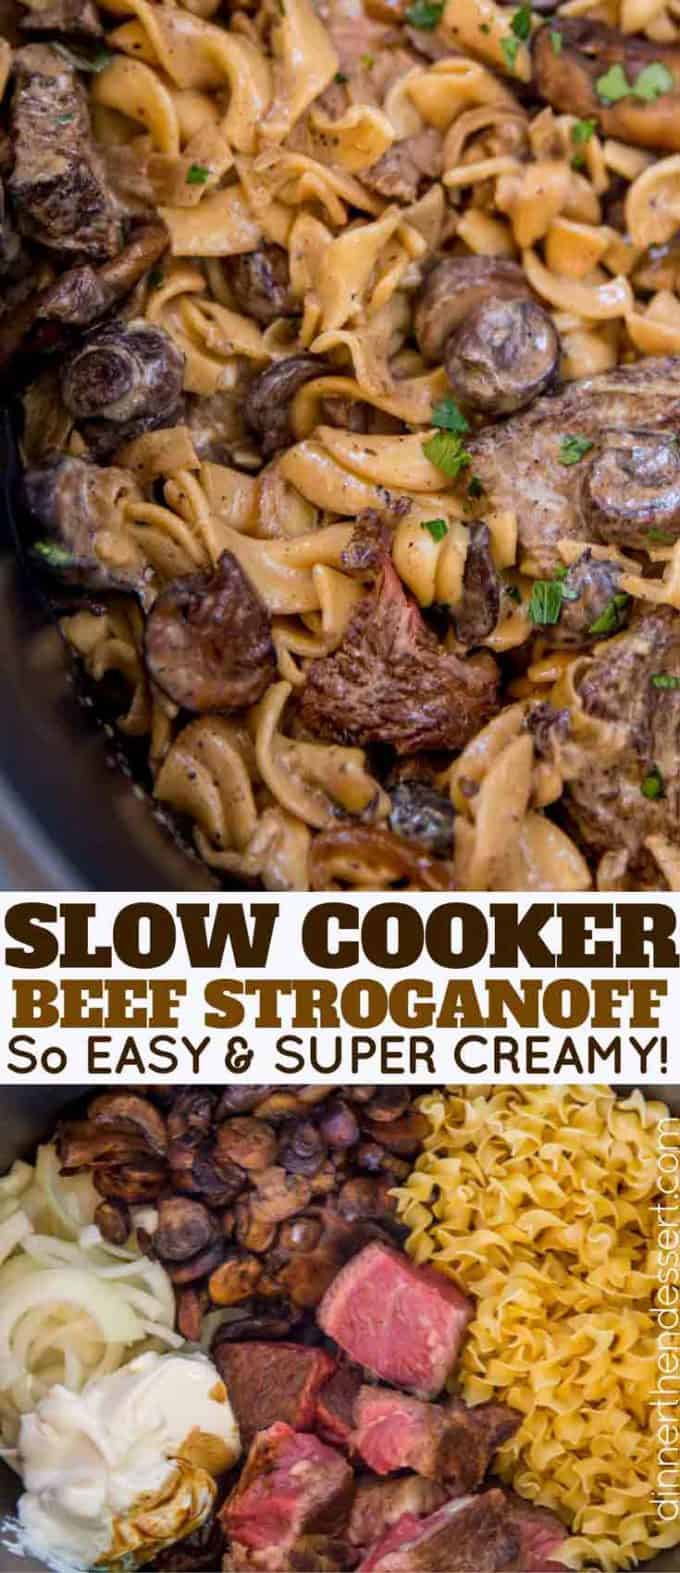 Slow Cooker Beef Stroganoff with tender, sliceable cuts of beef and noodles cooked together in the slow cooker with a rich creamy mushroom sauce.